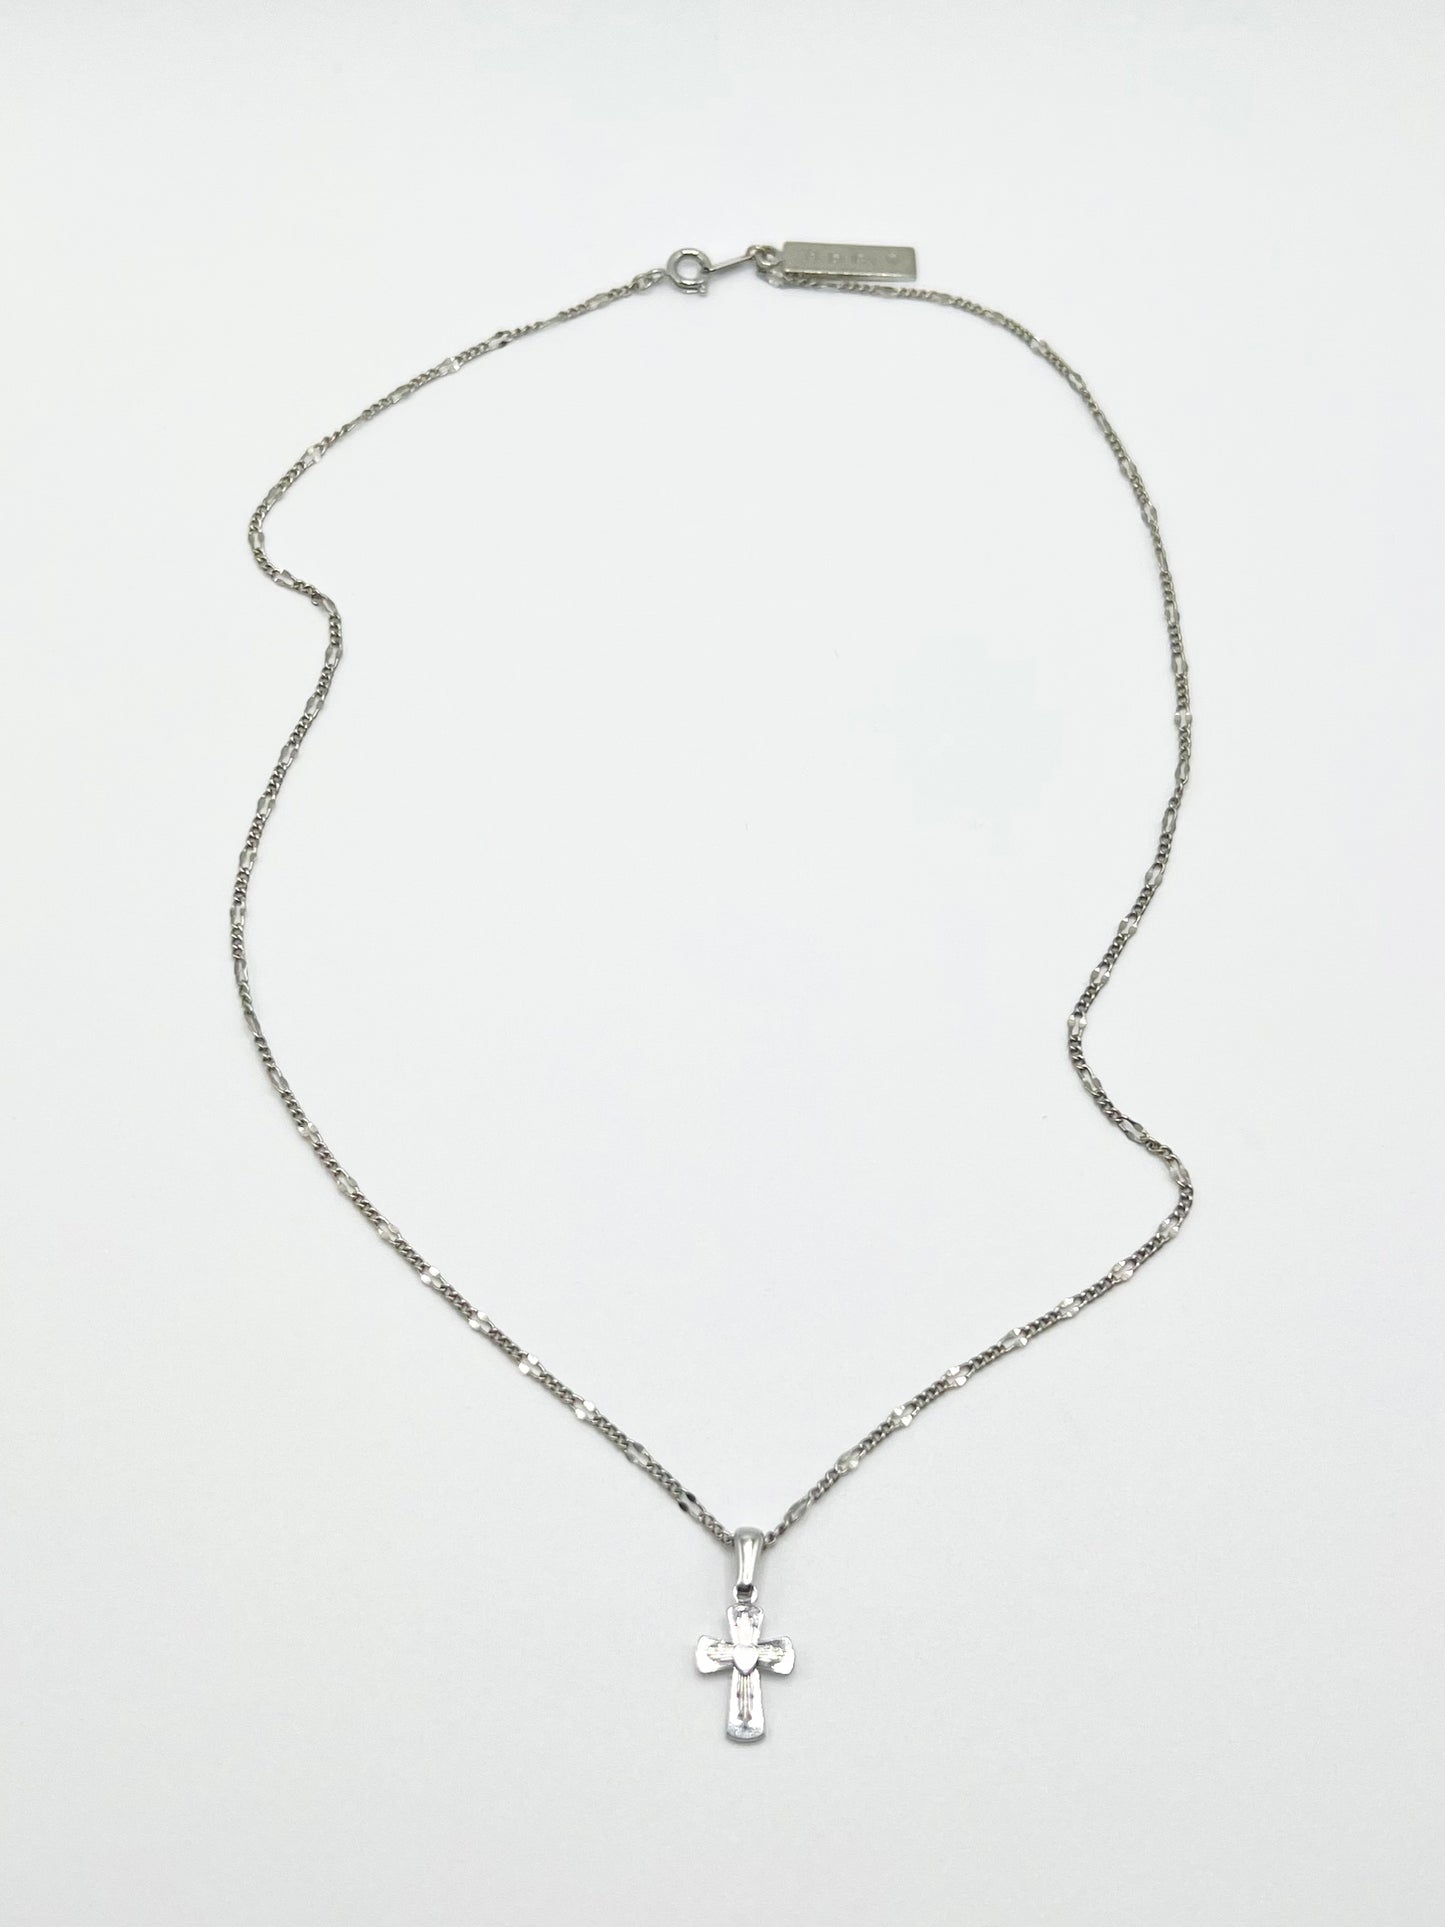 NW cross motif necklace - Silver